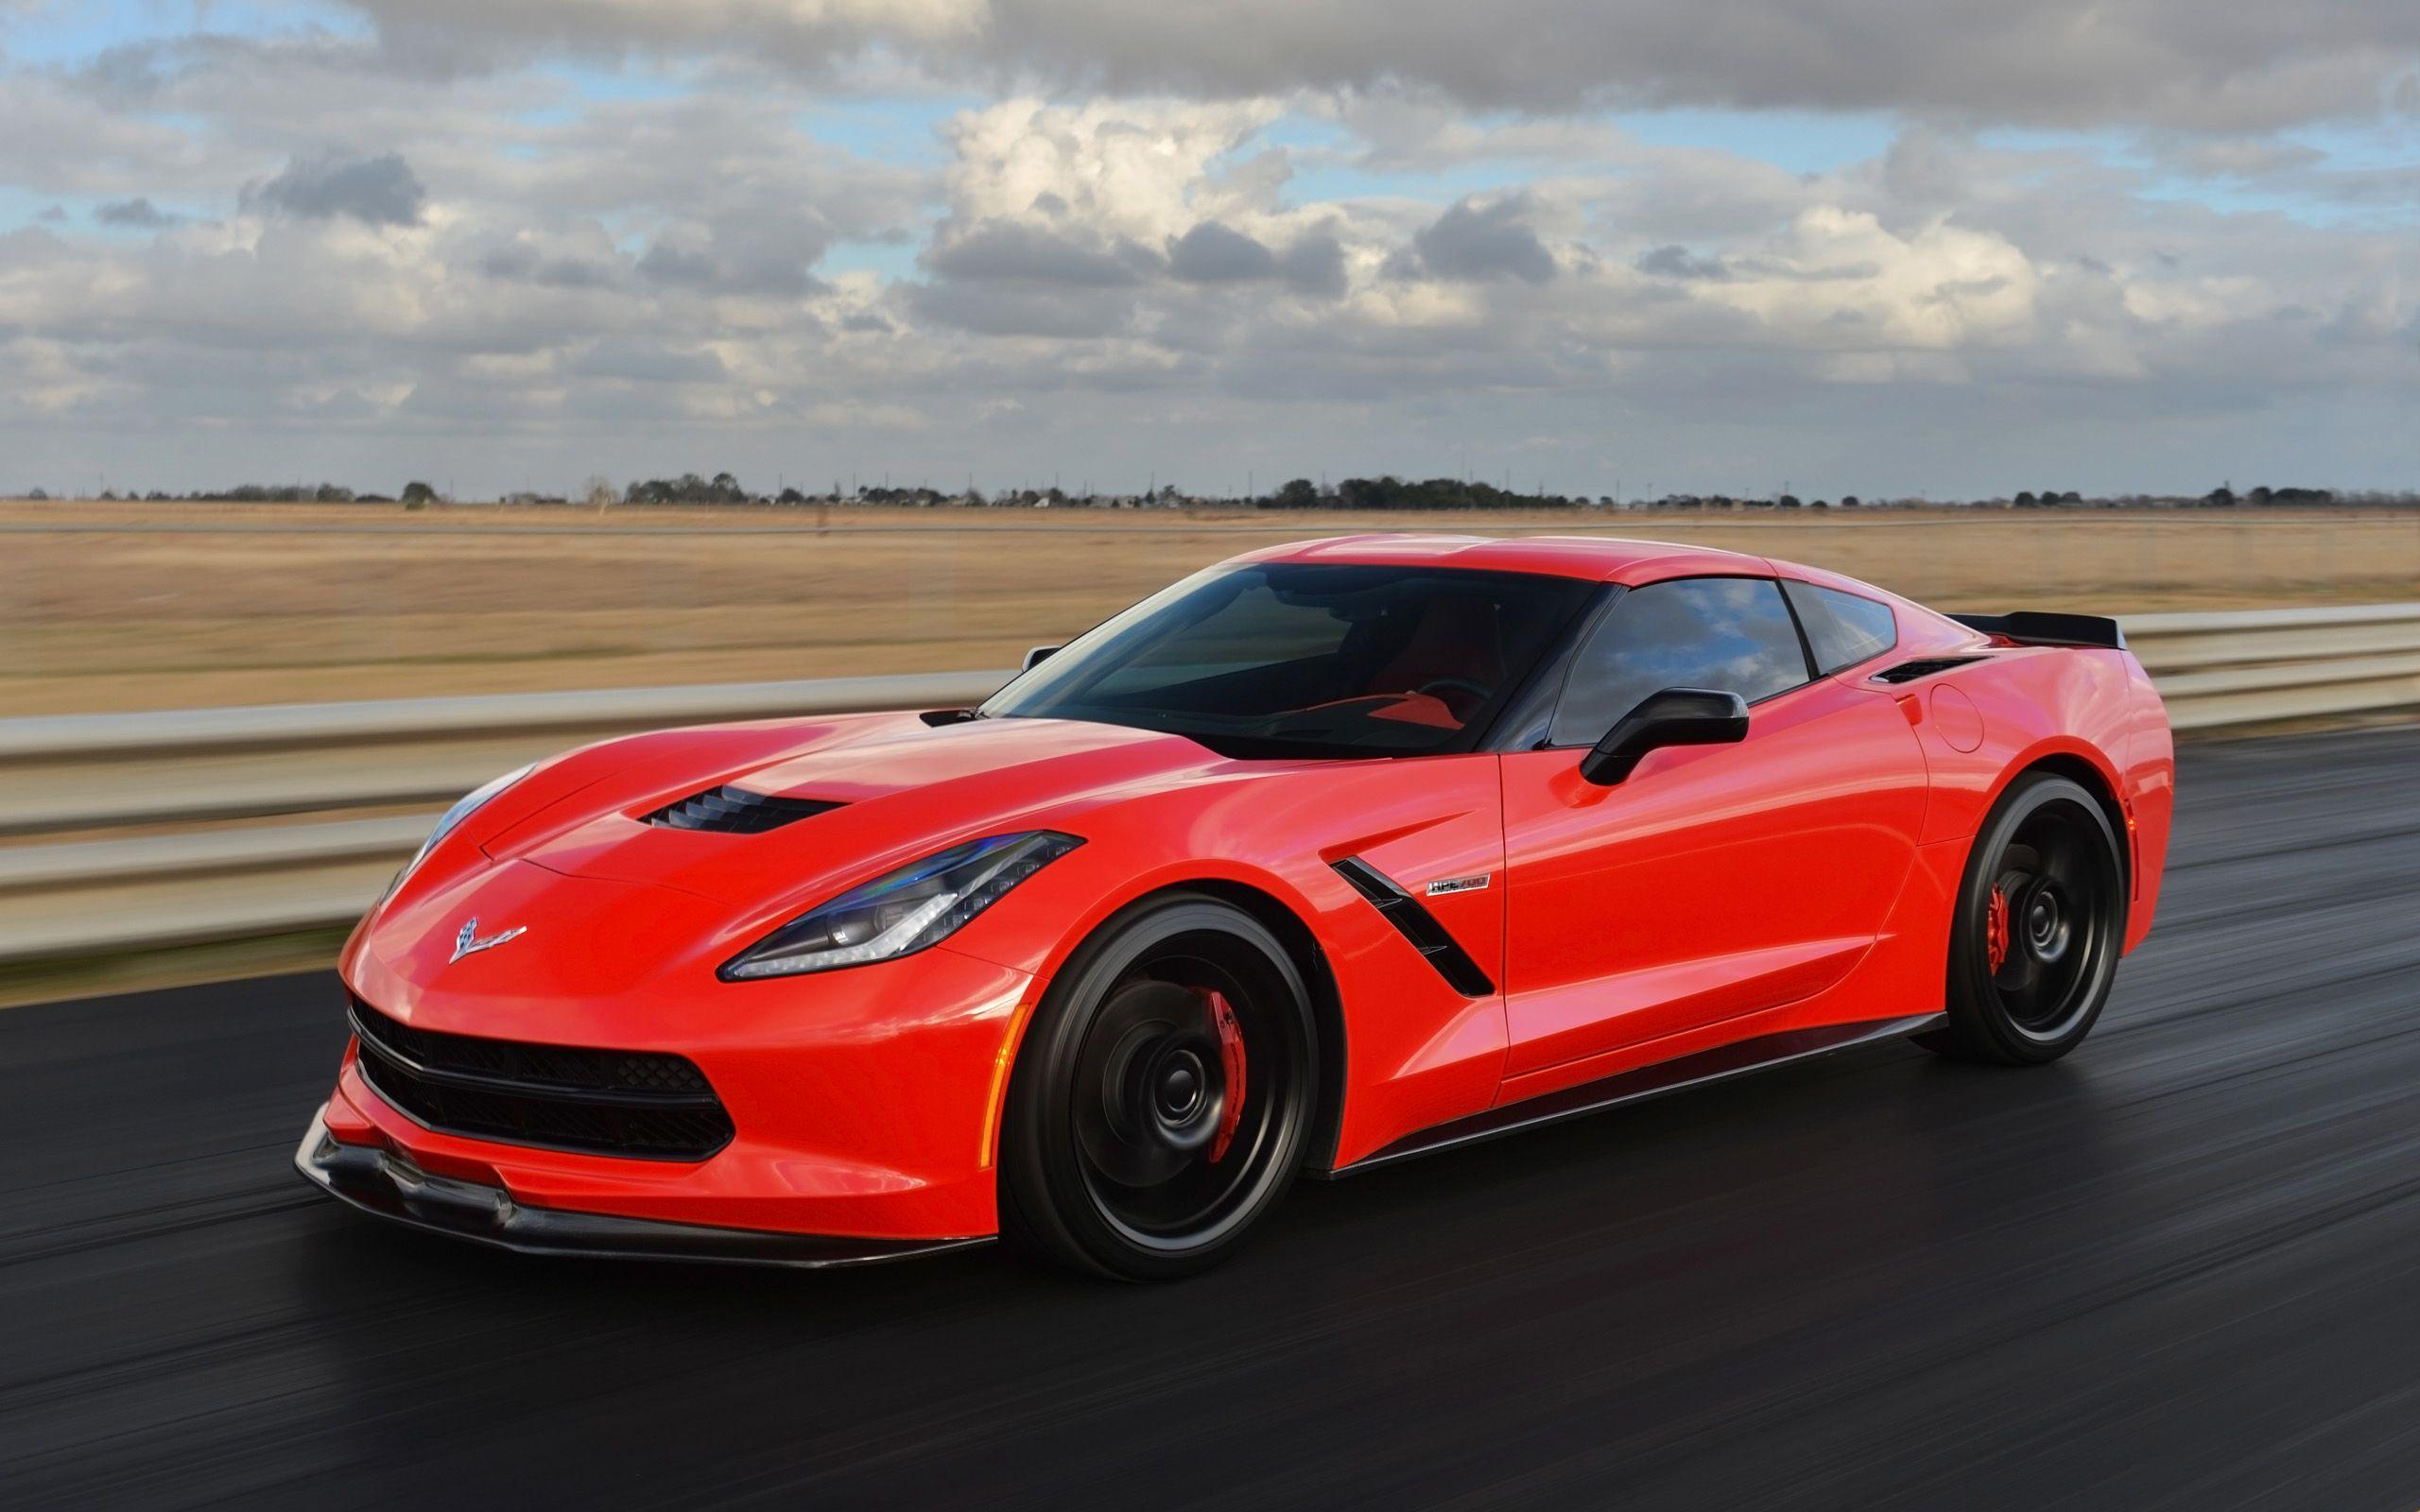 Download Corvette wallpapers for mobile phone free Corvette HD pictures